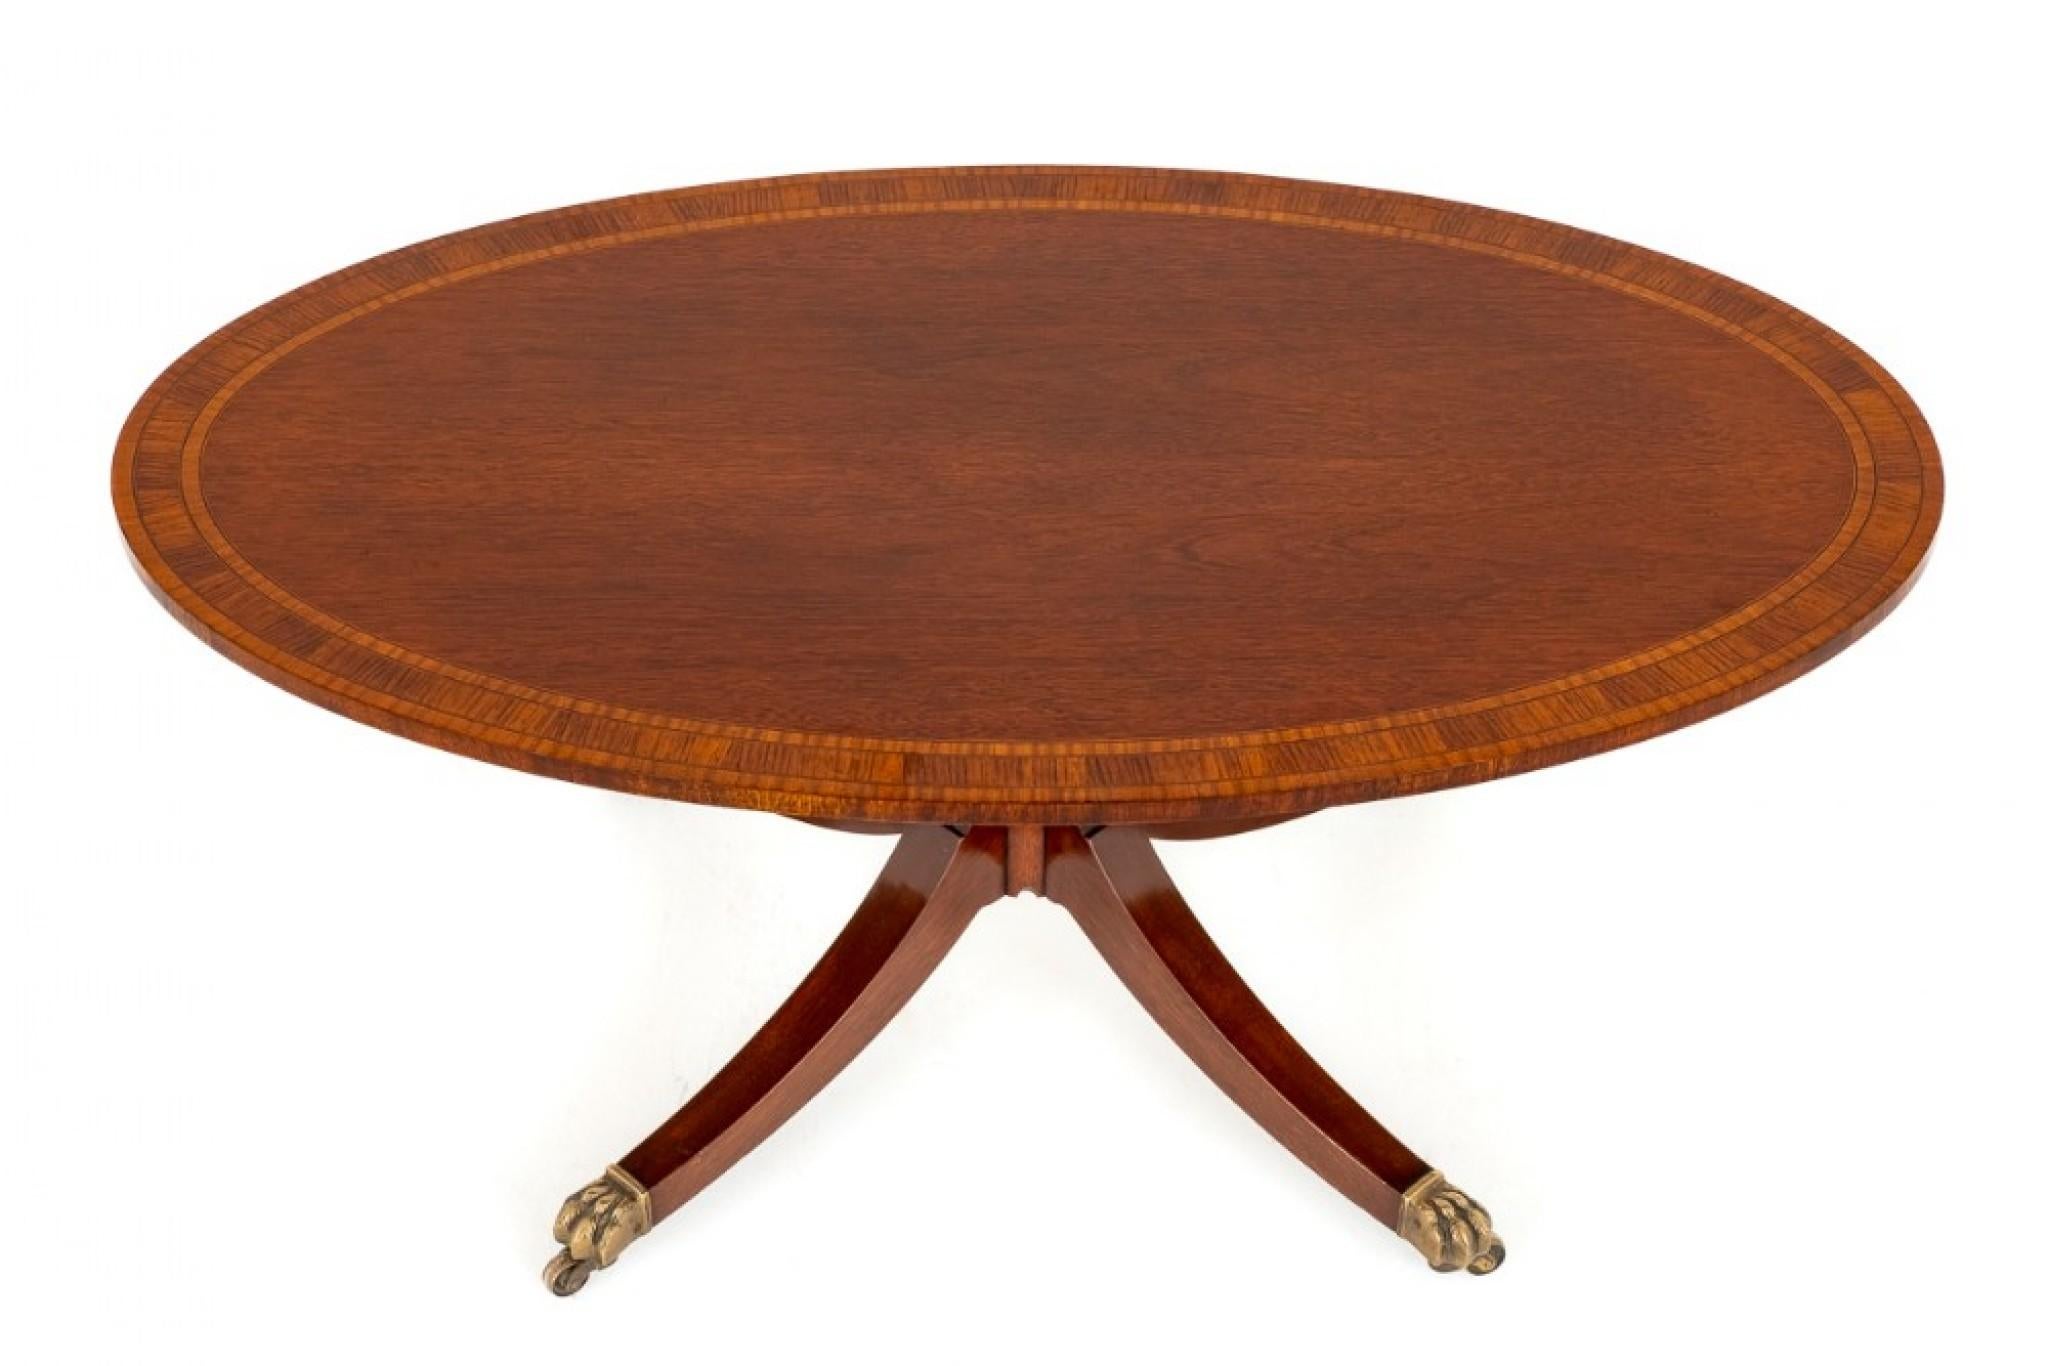 Regency Revival mahogany centre table.
The top of the centre table features triple satinwood cross bandings and highly figured mahogany timbers.
The base having a turned gun barrel column and swept and fluted legs with brass castors.
The table